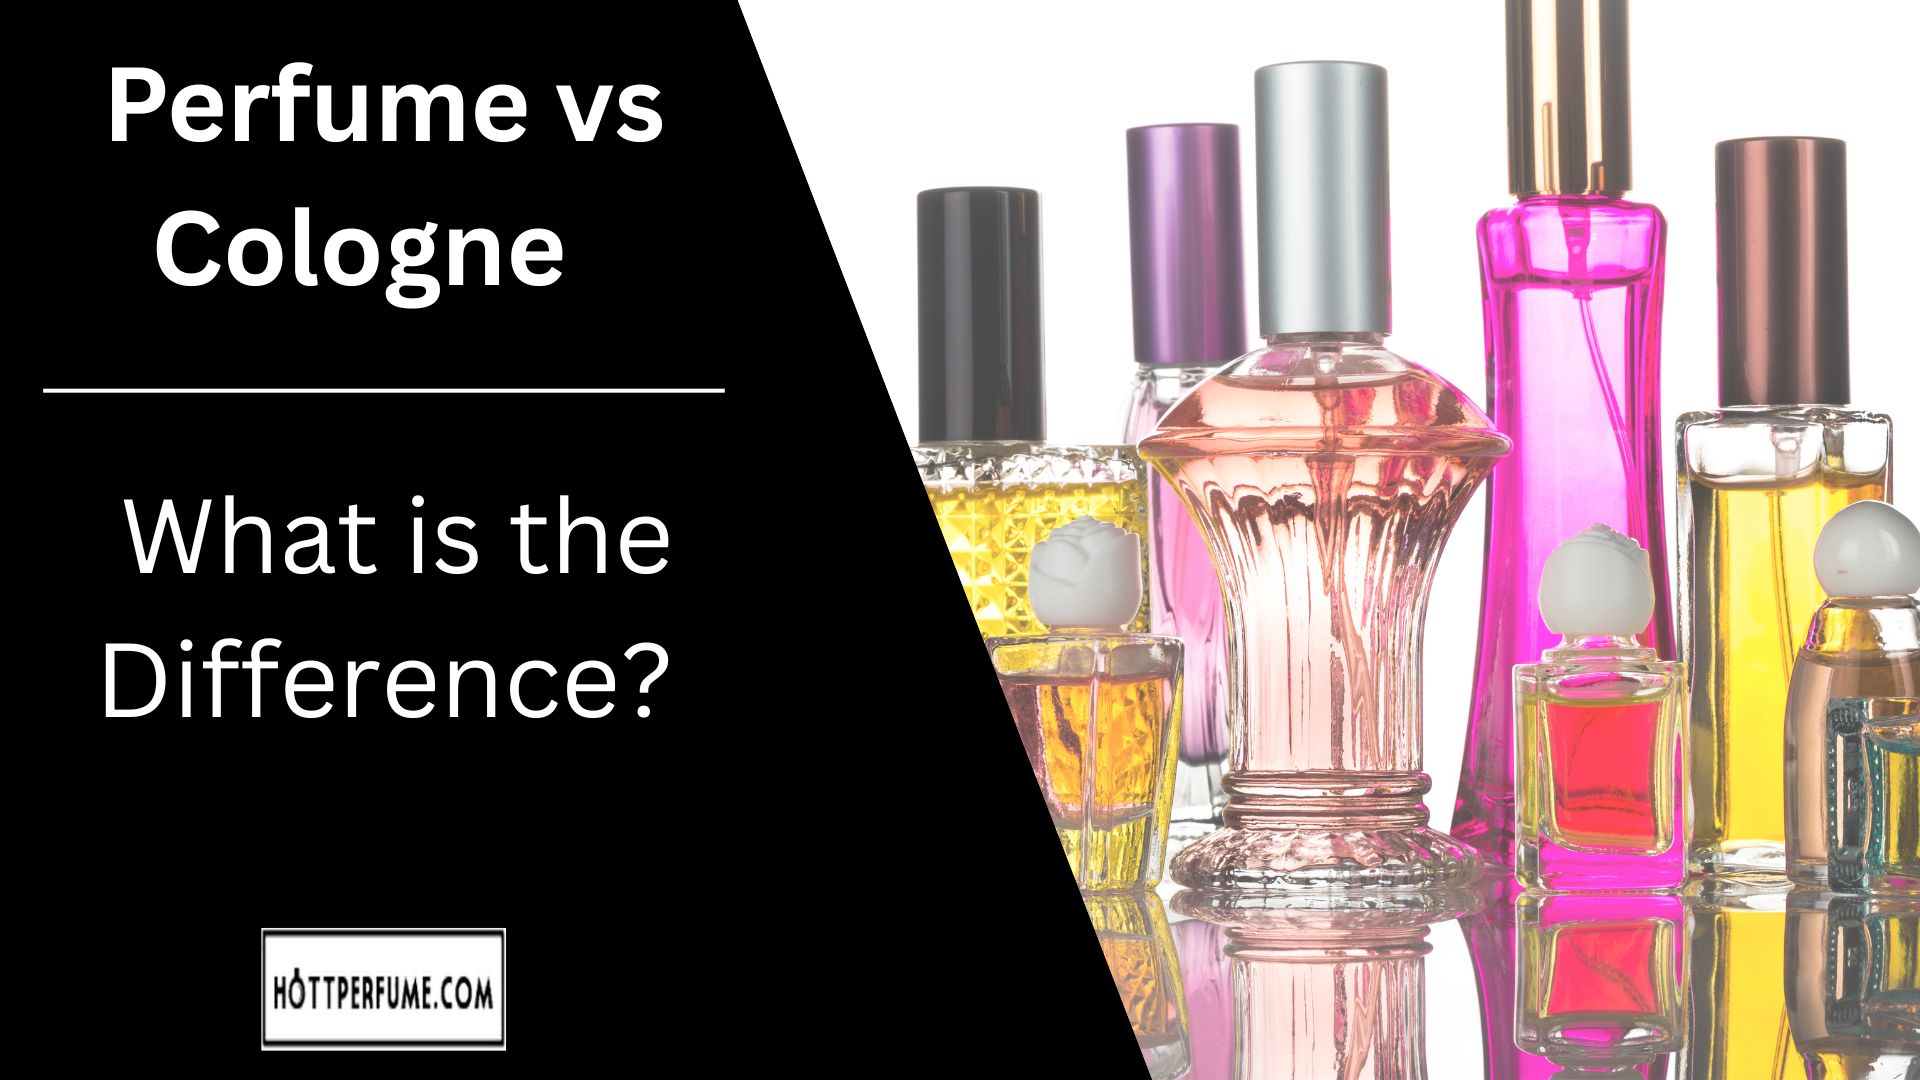 Perfume vs Cologne - What is the Difference?